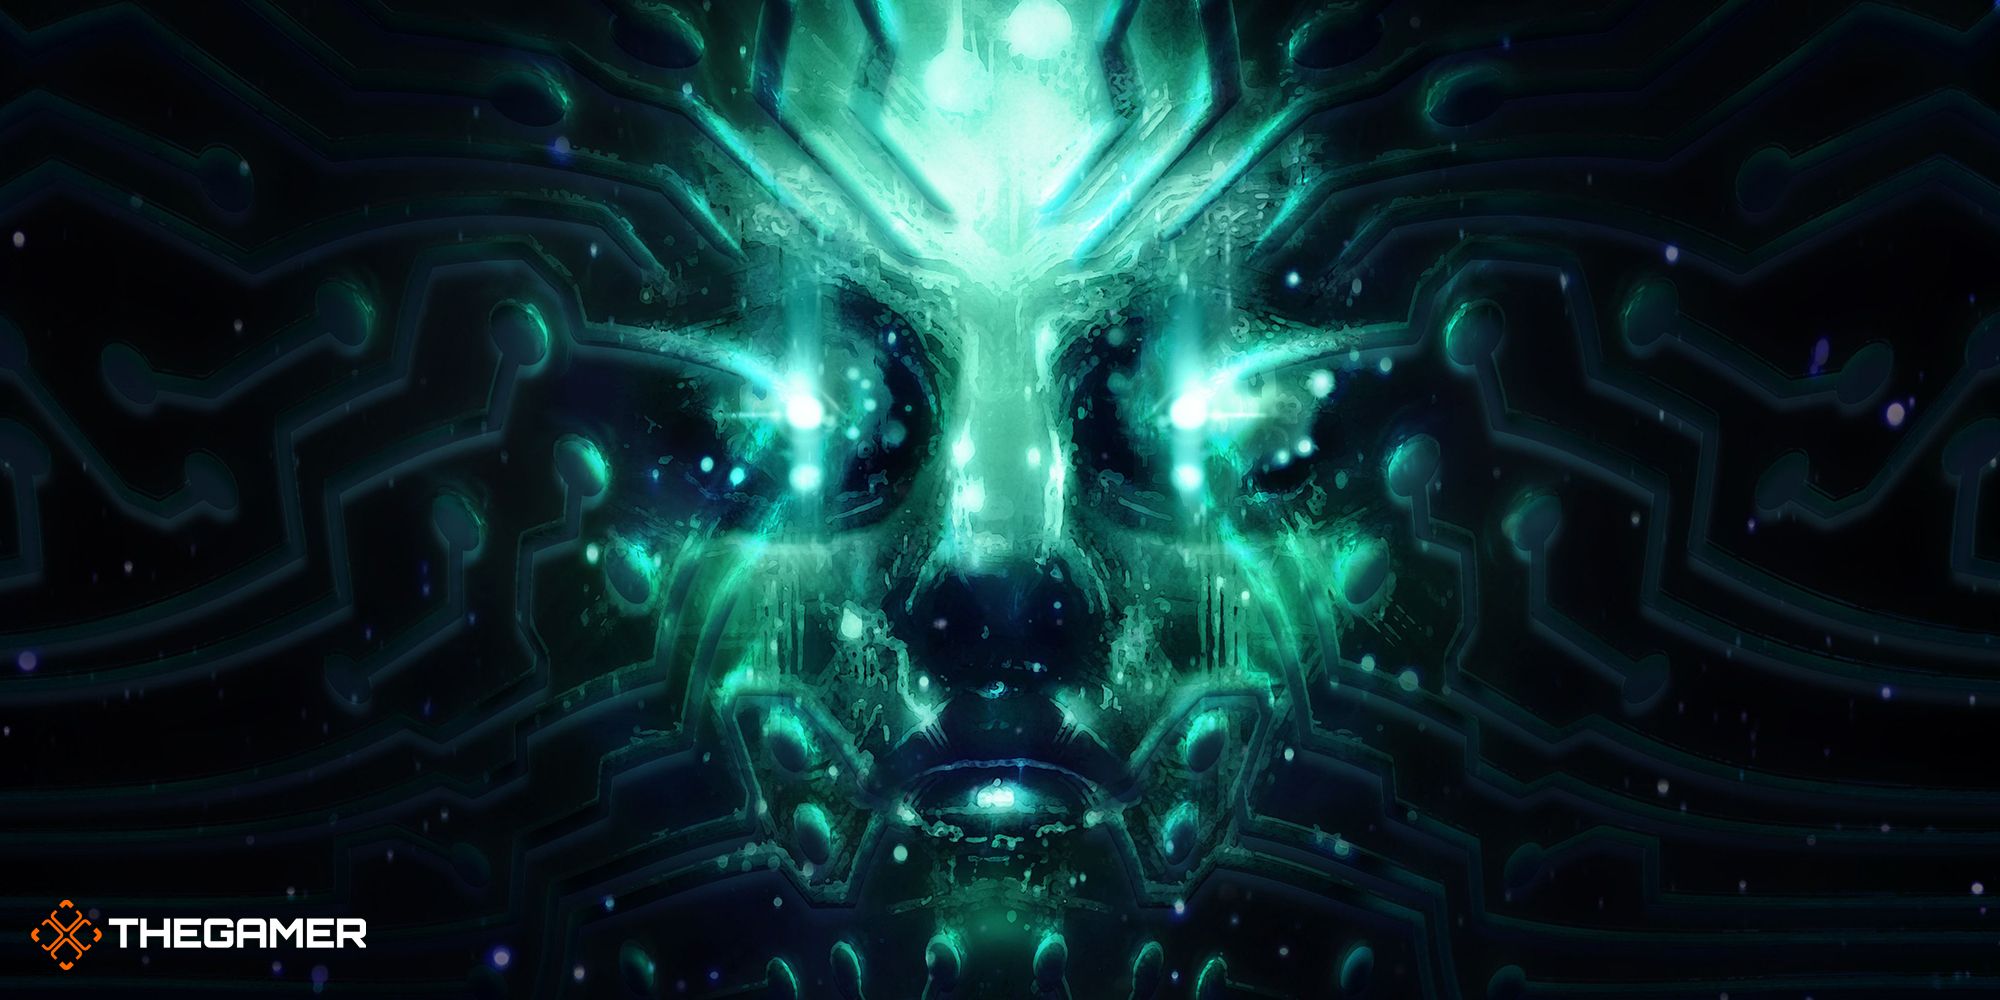 Game art from System Shock Remake.